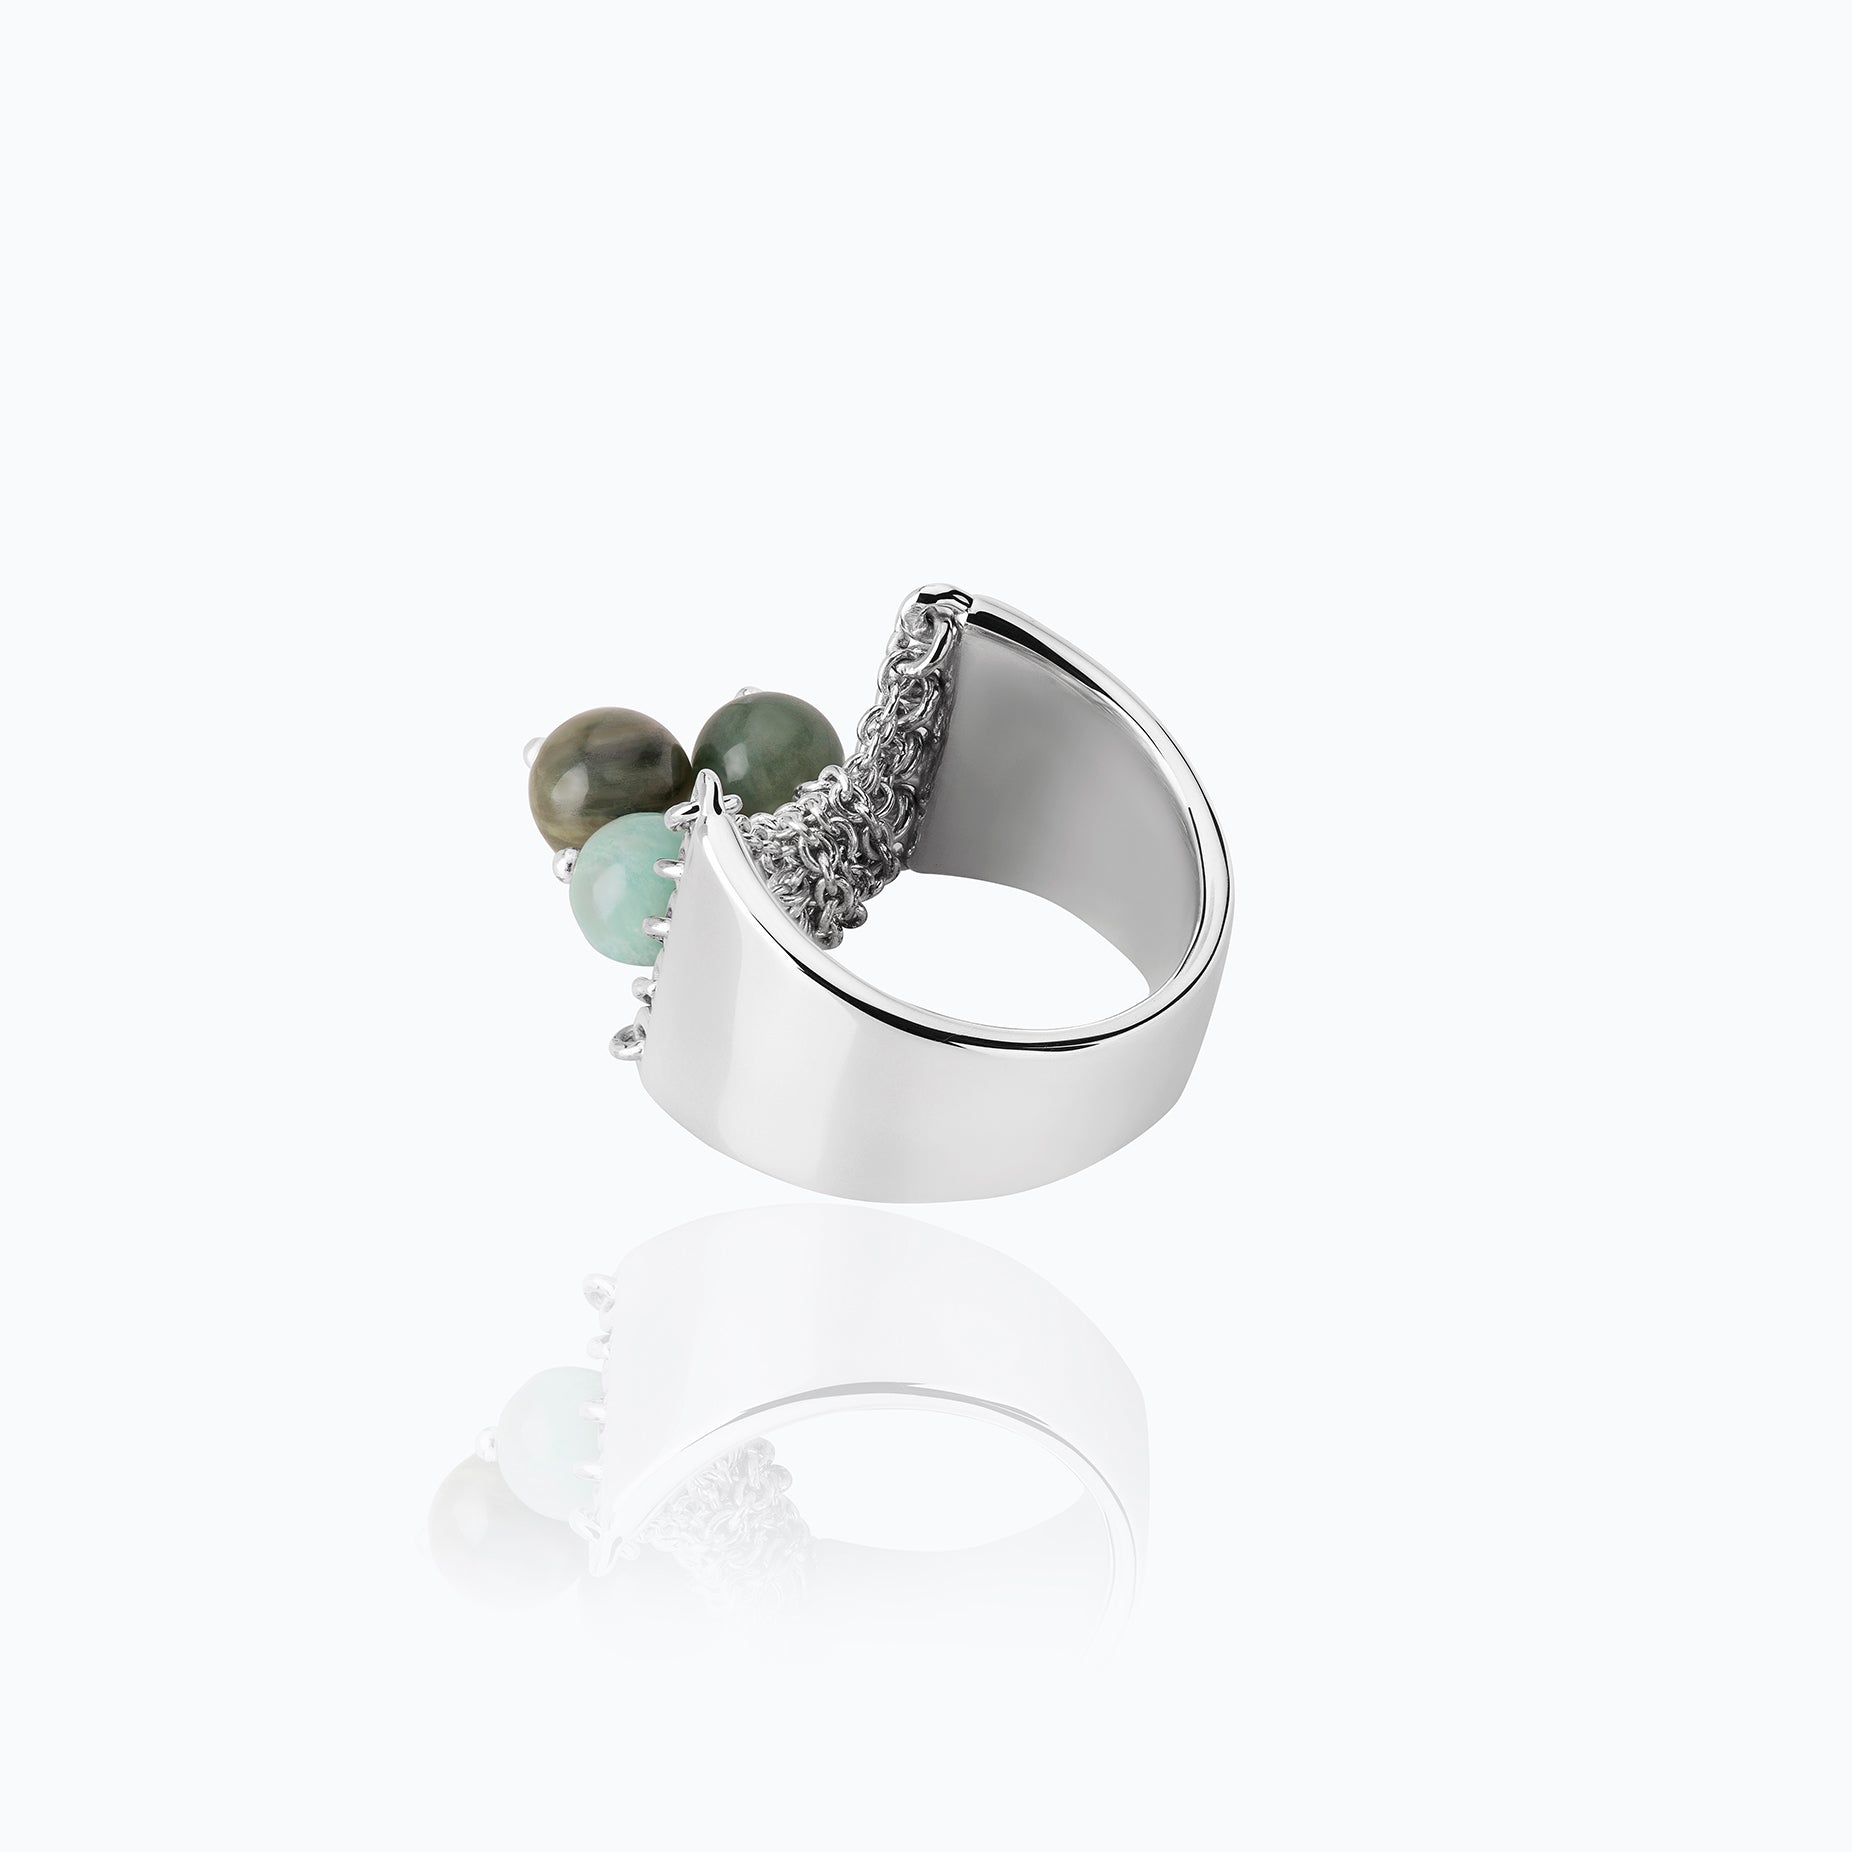 TULUM BY TANE KNOT RING